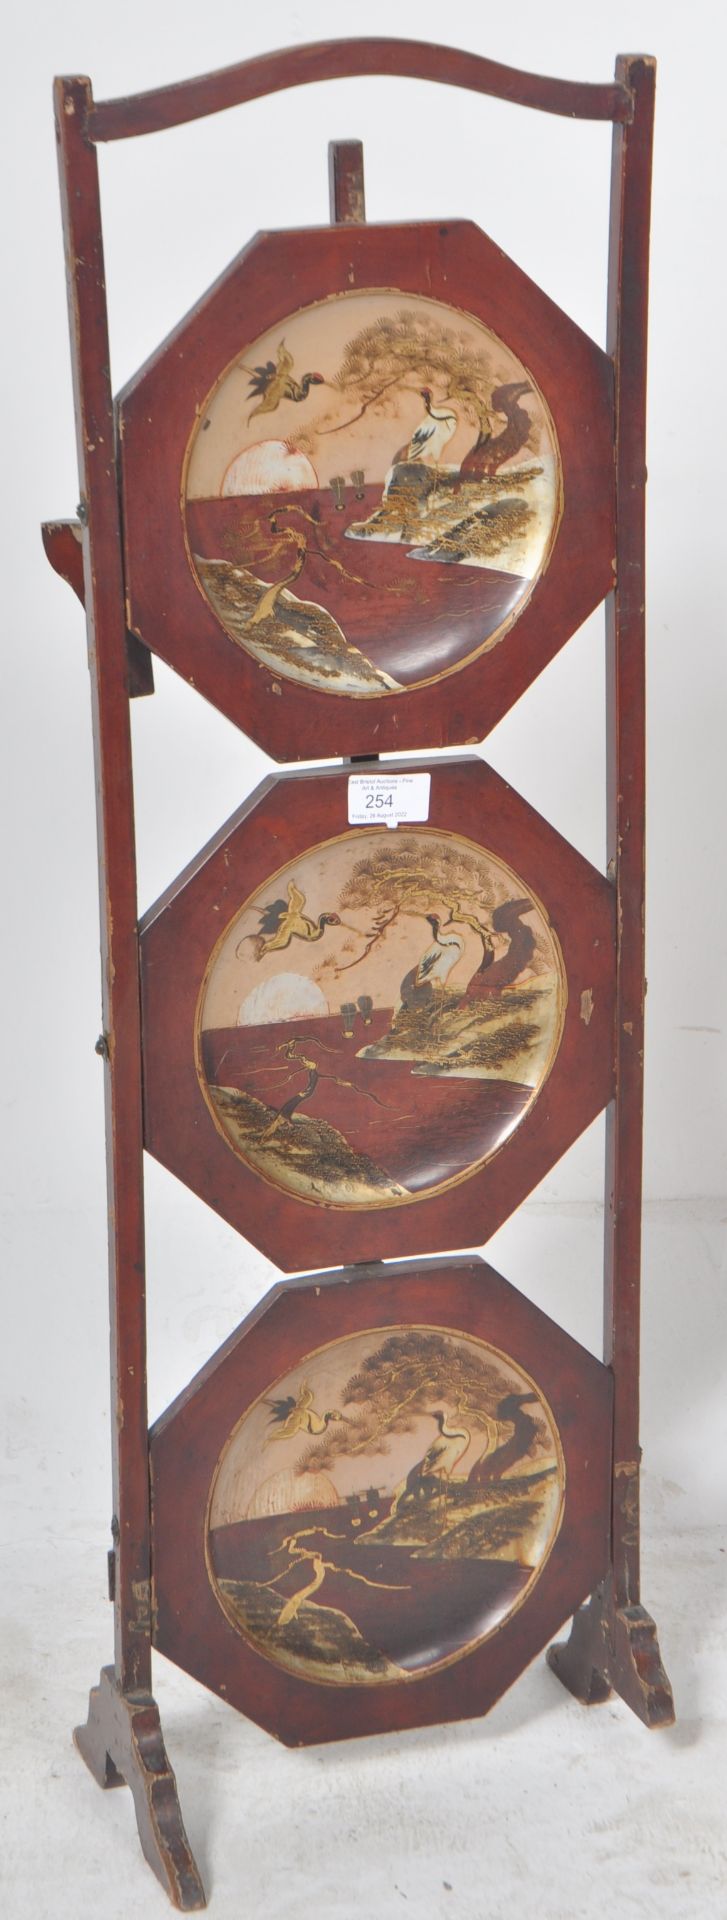 19TH CENTURY CHINESE THREE TIER CAKE / PLATE STAND - Image 3 of 8